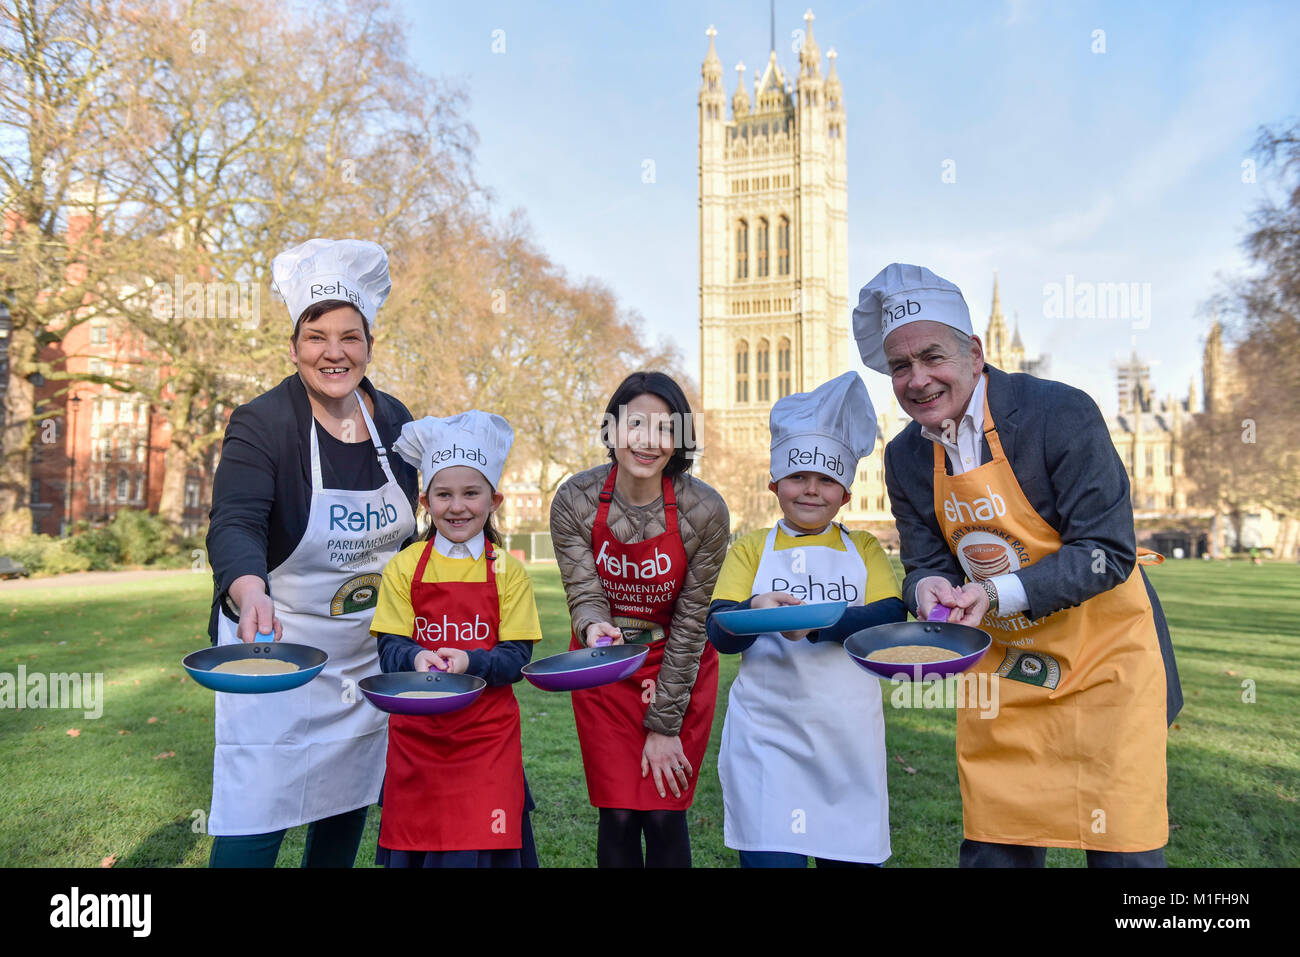 London, UK. 30th Jan, 2018. (L to R) Tonia Antoniazzi MP for the Parliament Team, and ITV News' Lucrezia Millarini for the Media Team, are joined by race veteran and this year's Official Starter, ITV newscaster, Alastair Stewart OBE, at a pancake race bootcamp in Westminster ahead of the main event, the Rehab Parliamentary Pancake Race, on Shrove Tuesday. They are joined by team mascots Grace and Jacob, both aged 8, from St Matthew's Primary School in Westminster. Credit: Stephen Chung/Alamy Live News Stock Photo